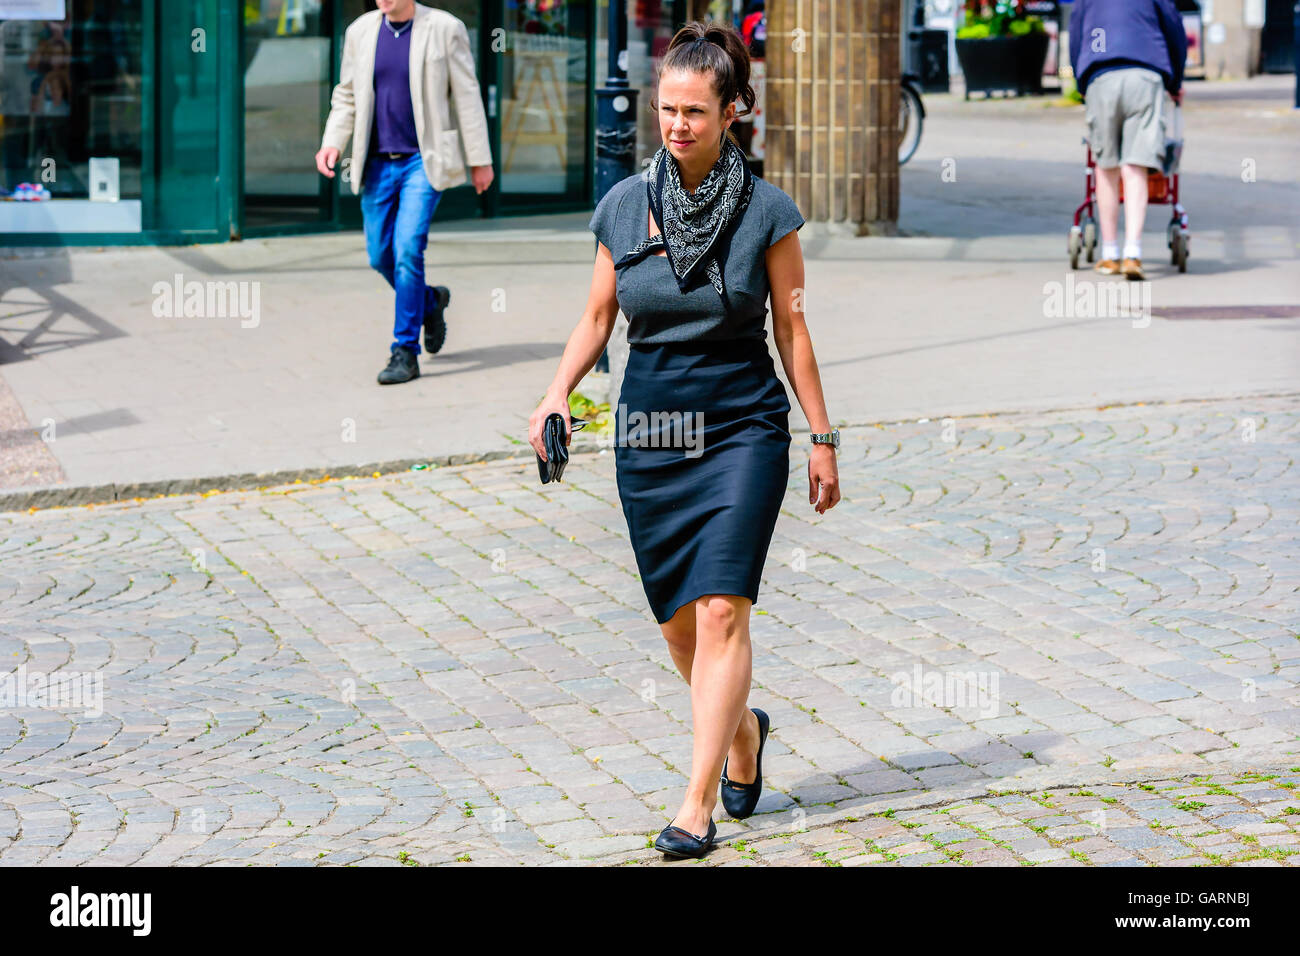 Motala, Sweden - June 21, 2016: Woman in skirt and blouse walking at a street in town. She also wears a scarf and ballerina shoe Stock Photo